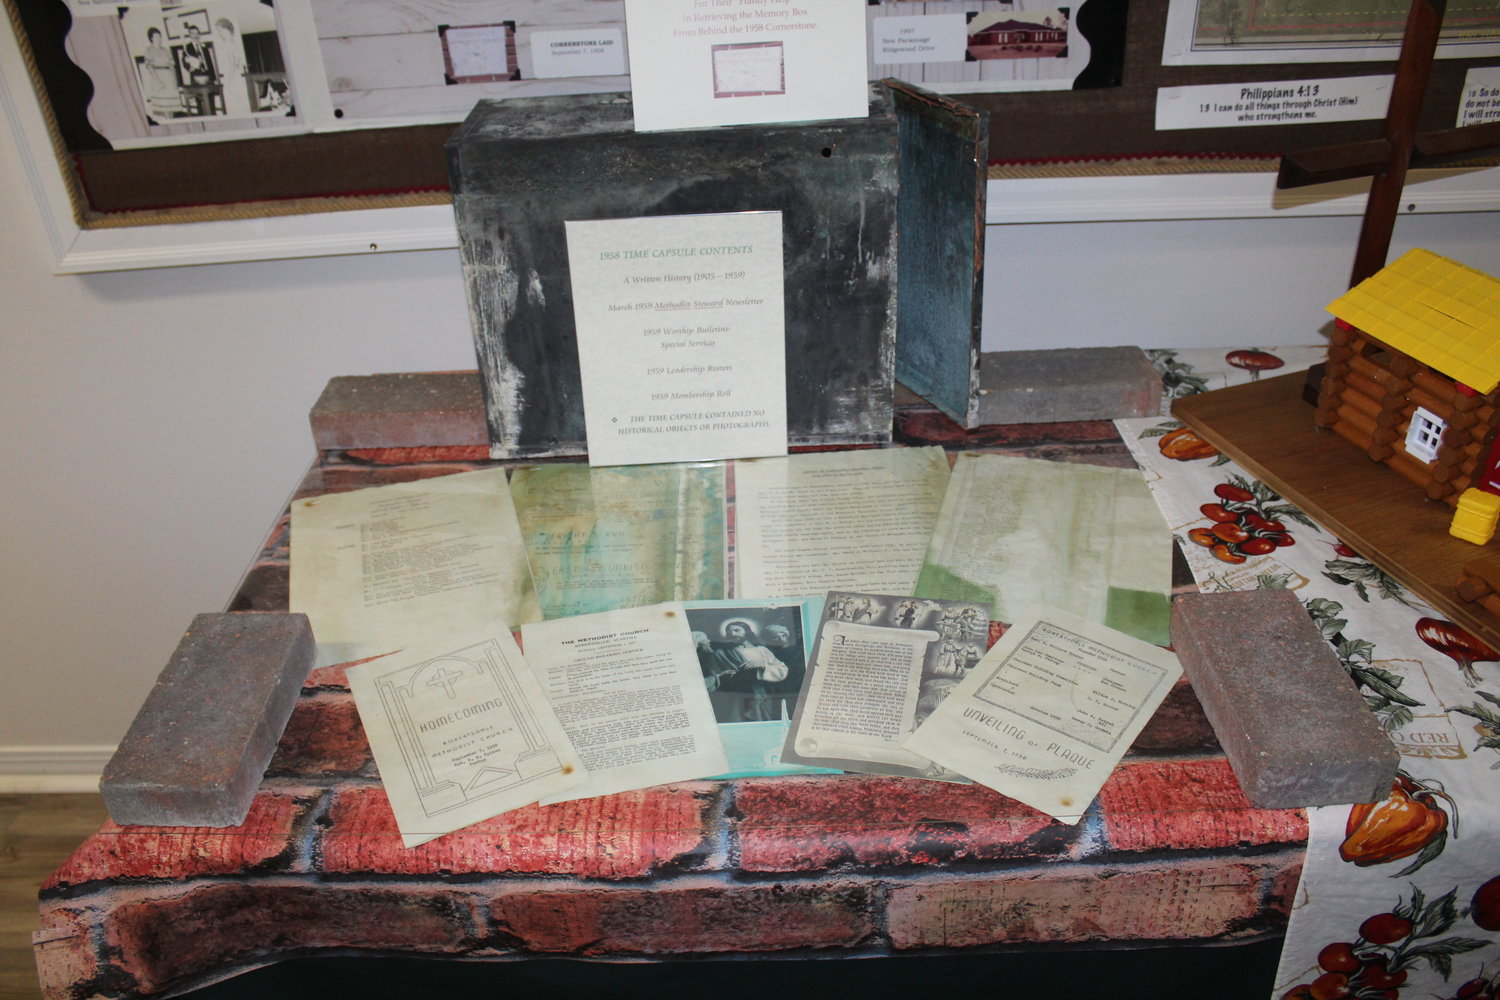 The time capsule contained a copy of the church newsletter, worship bulletins, leadership rosters, a membership roll and a written history of the time.